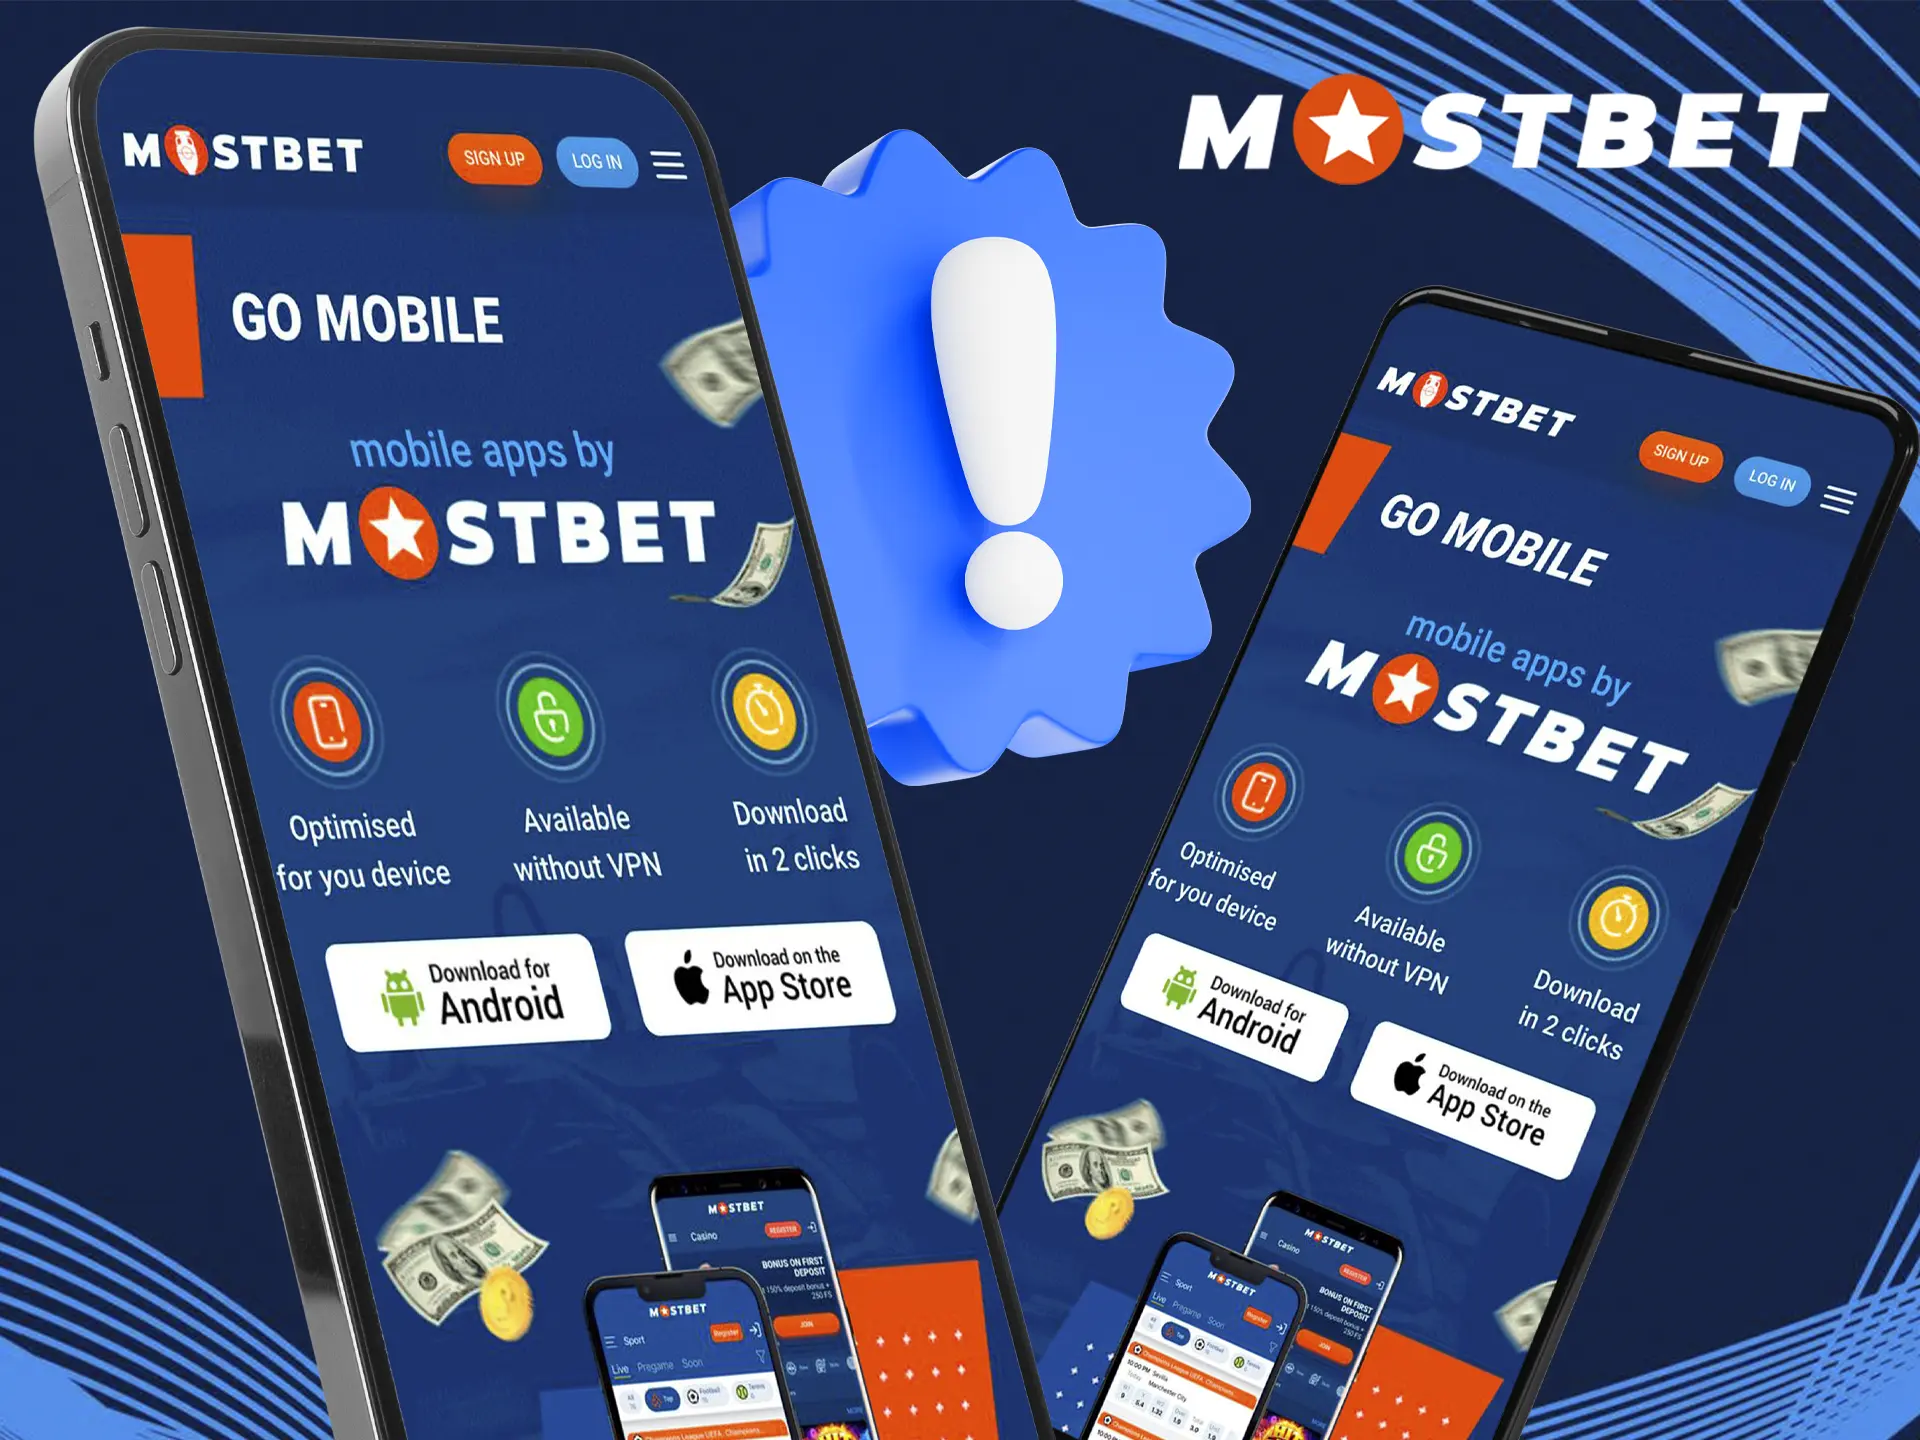 Explore tips on downloading and installing the Mostbet app.